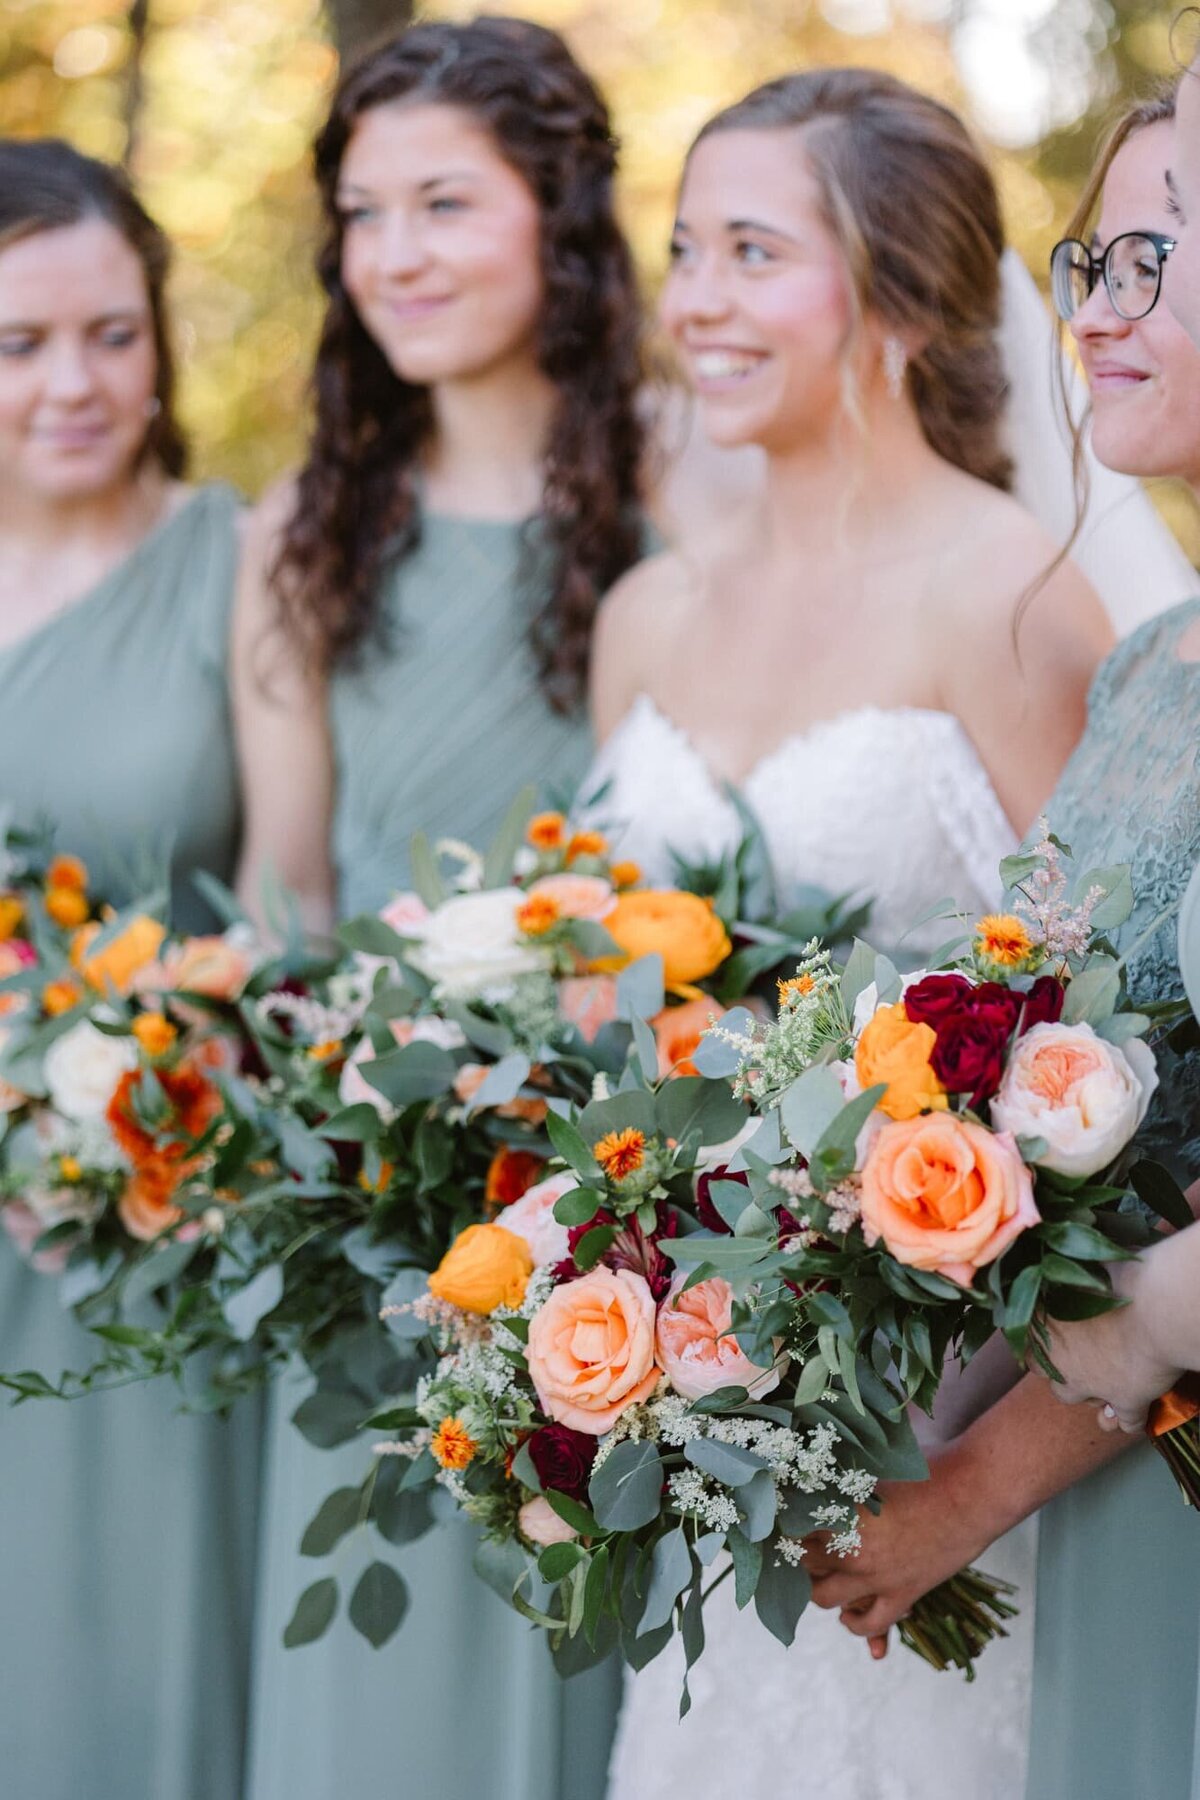 Bride and bridesmaids smiling and holding bouquets at farm wedding near Charlottesville VA